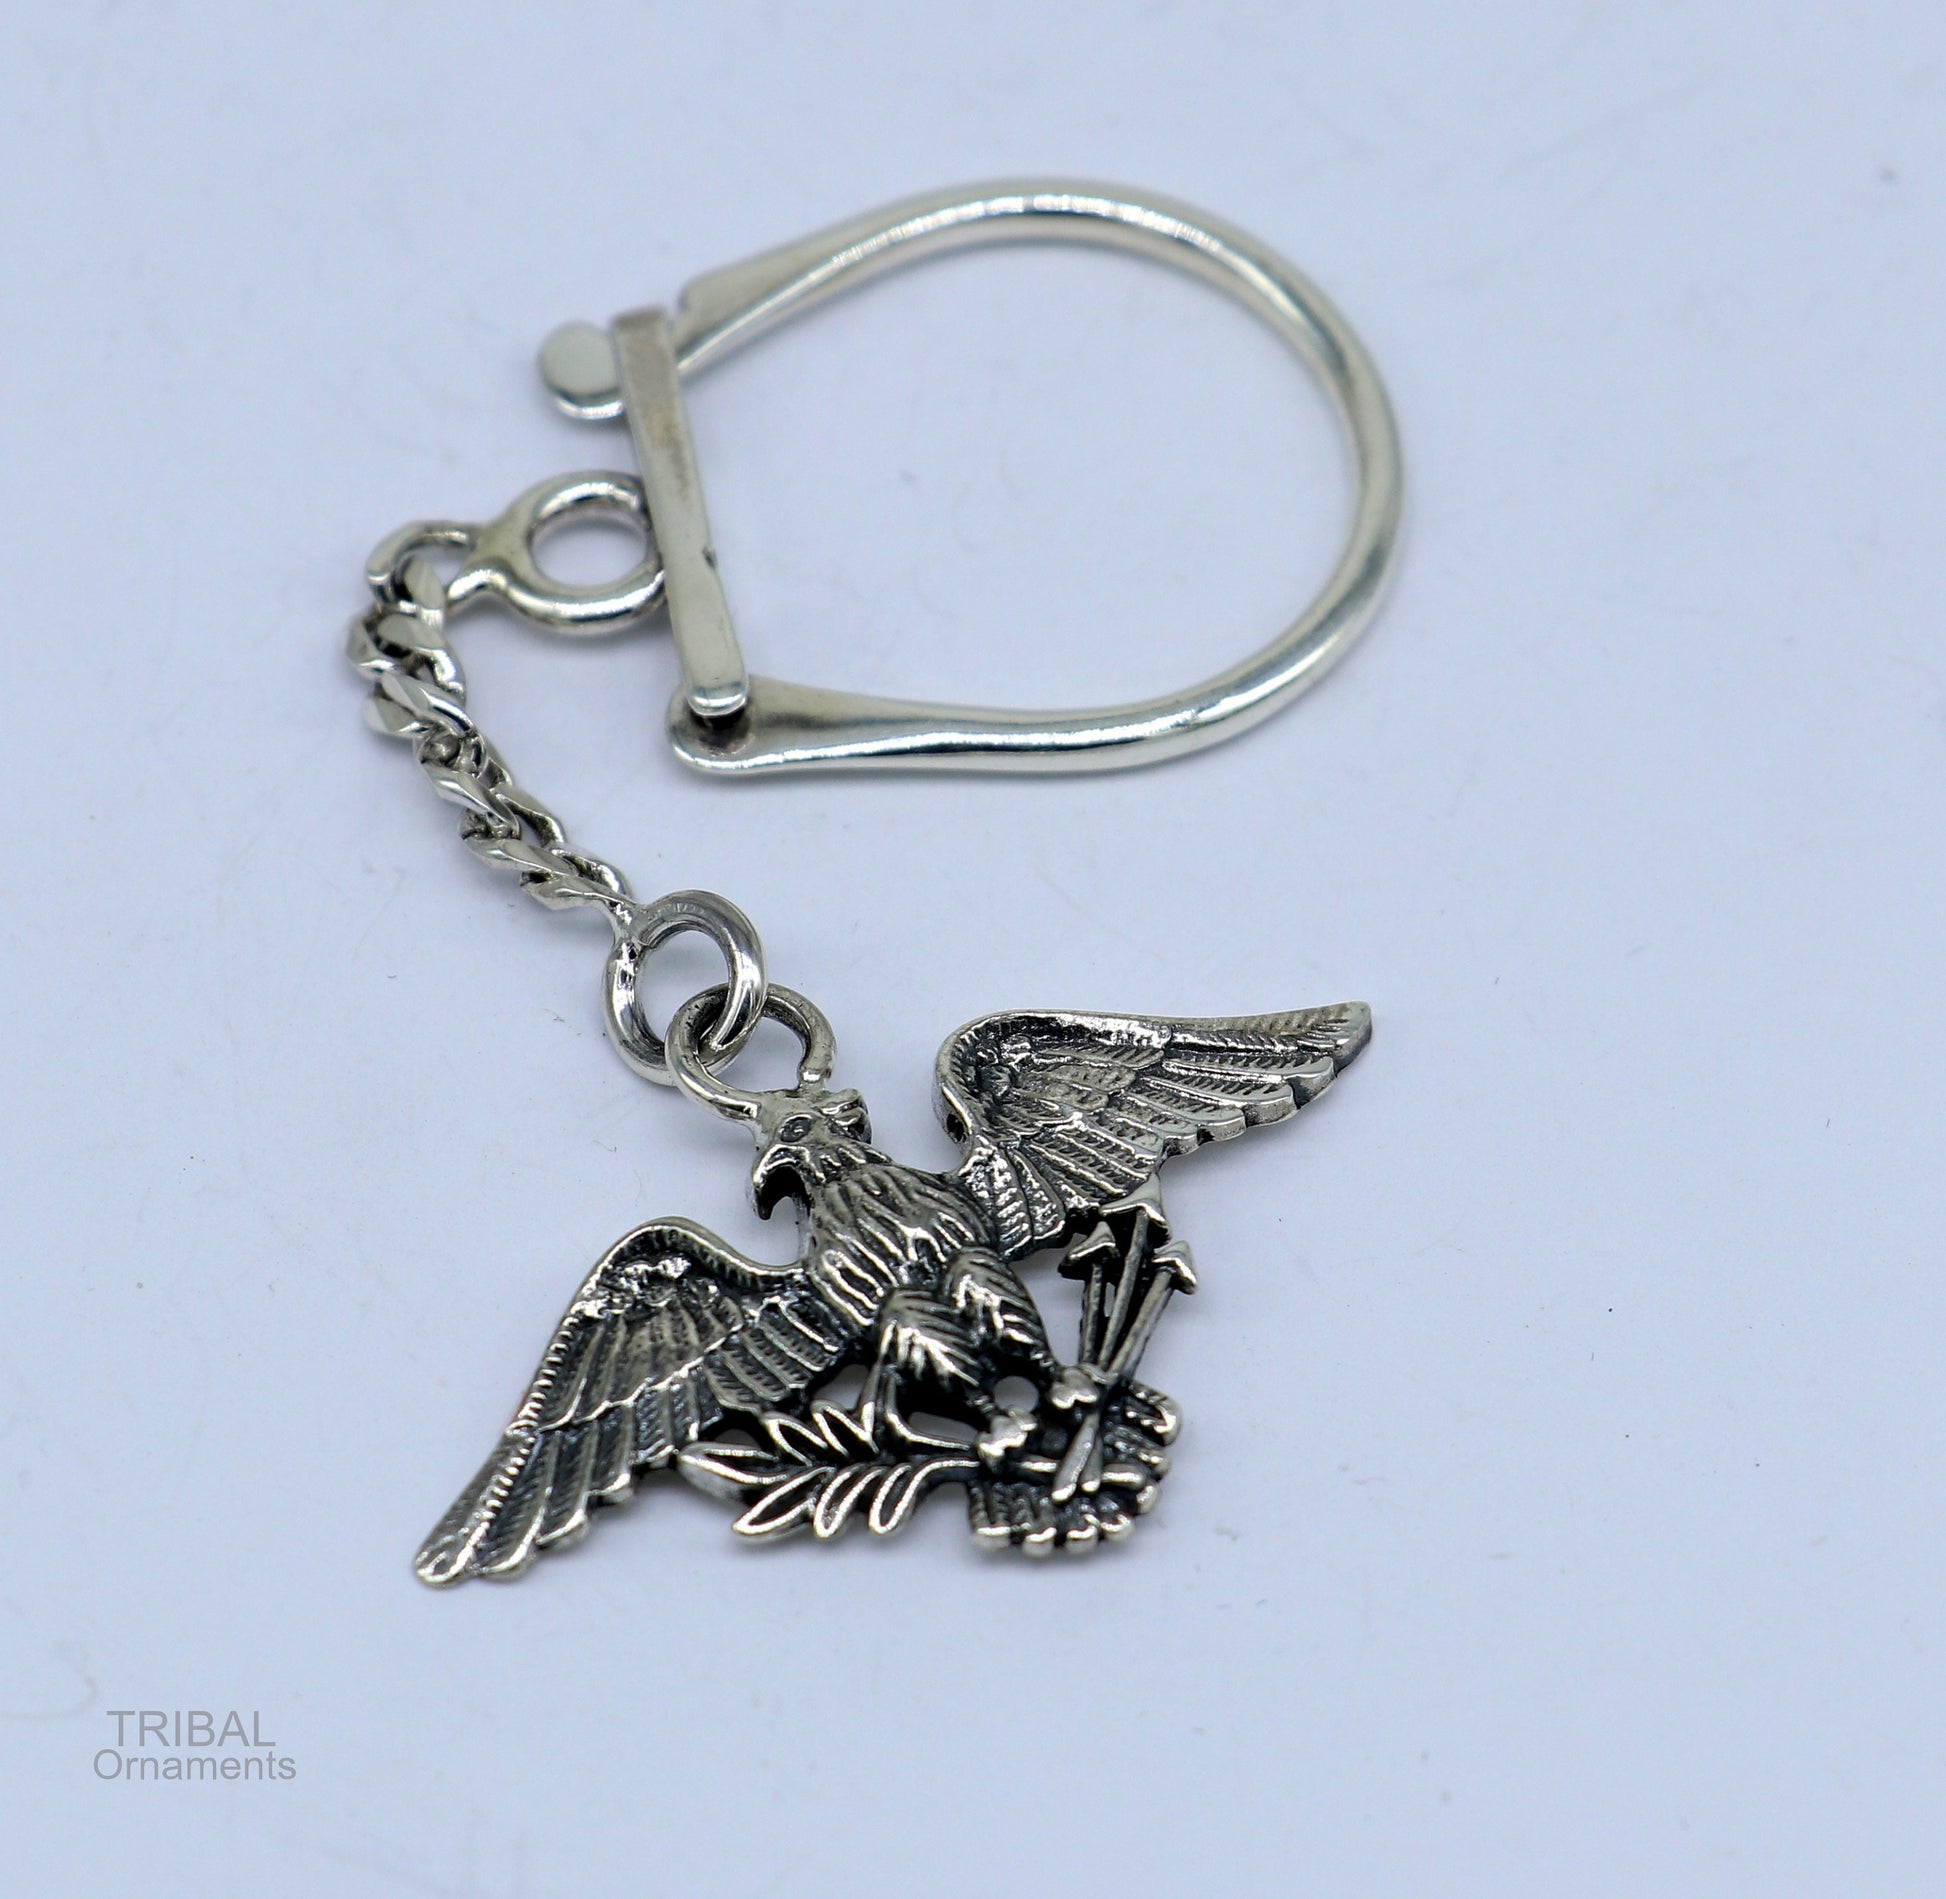 925 Sterling silver handmade unique style Garuda design solid key chian, stylish royal gifting silver accessories unisex gift kch09 - TRIBAL ORNAMENTS